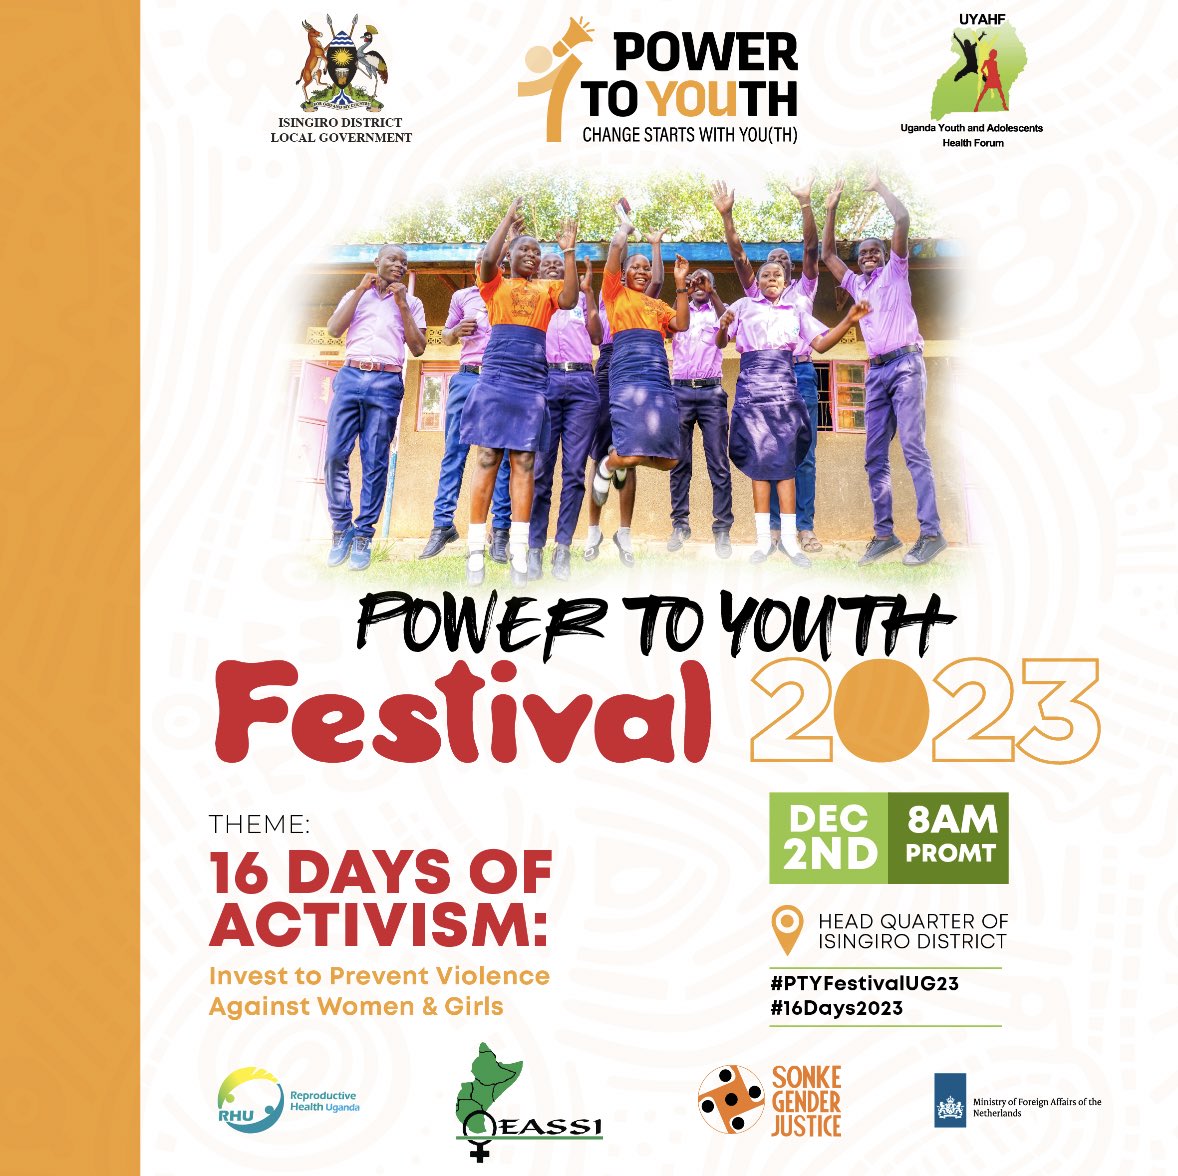 Youths! Are you ready? 

@Powertoyouthug brings you the biggest event to close off the year; the POWER TO YOUTH FESTIVAL. 🥳  

#PtyFestivalUg23 #PowerToYouth #16DaysOfActivism